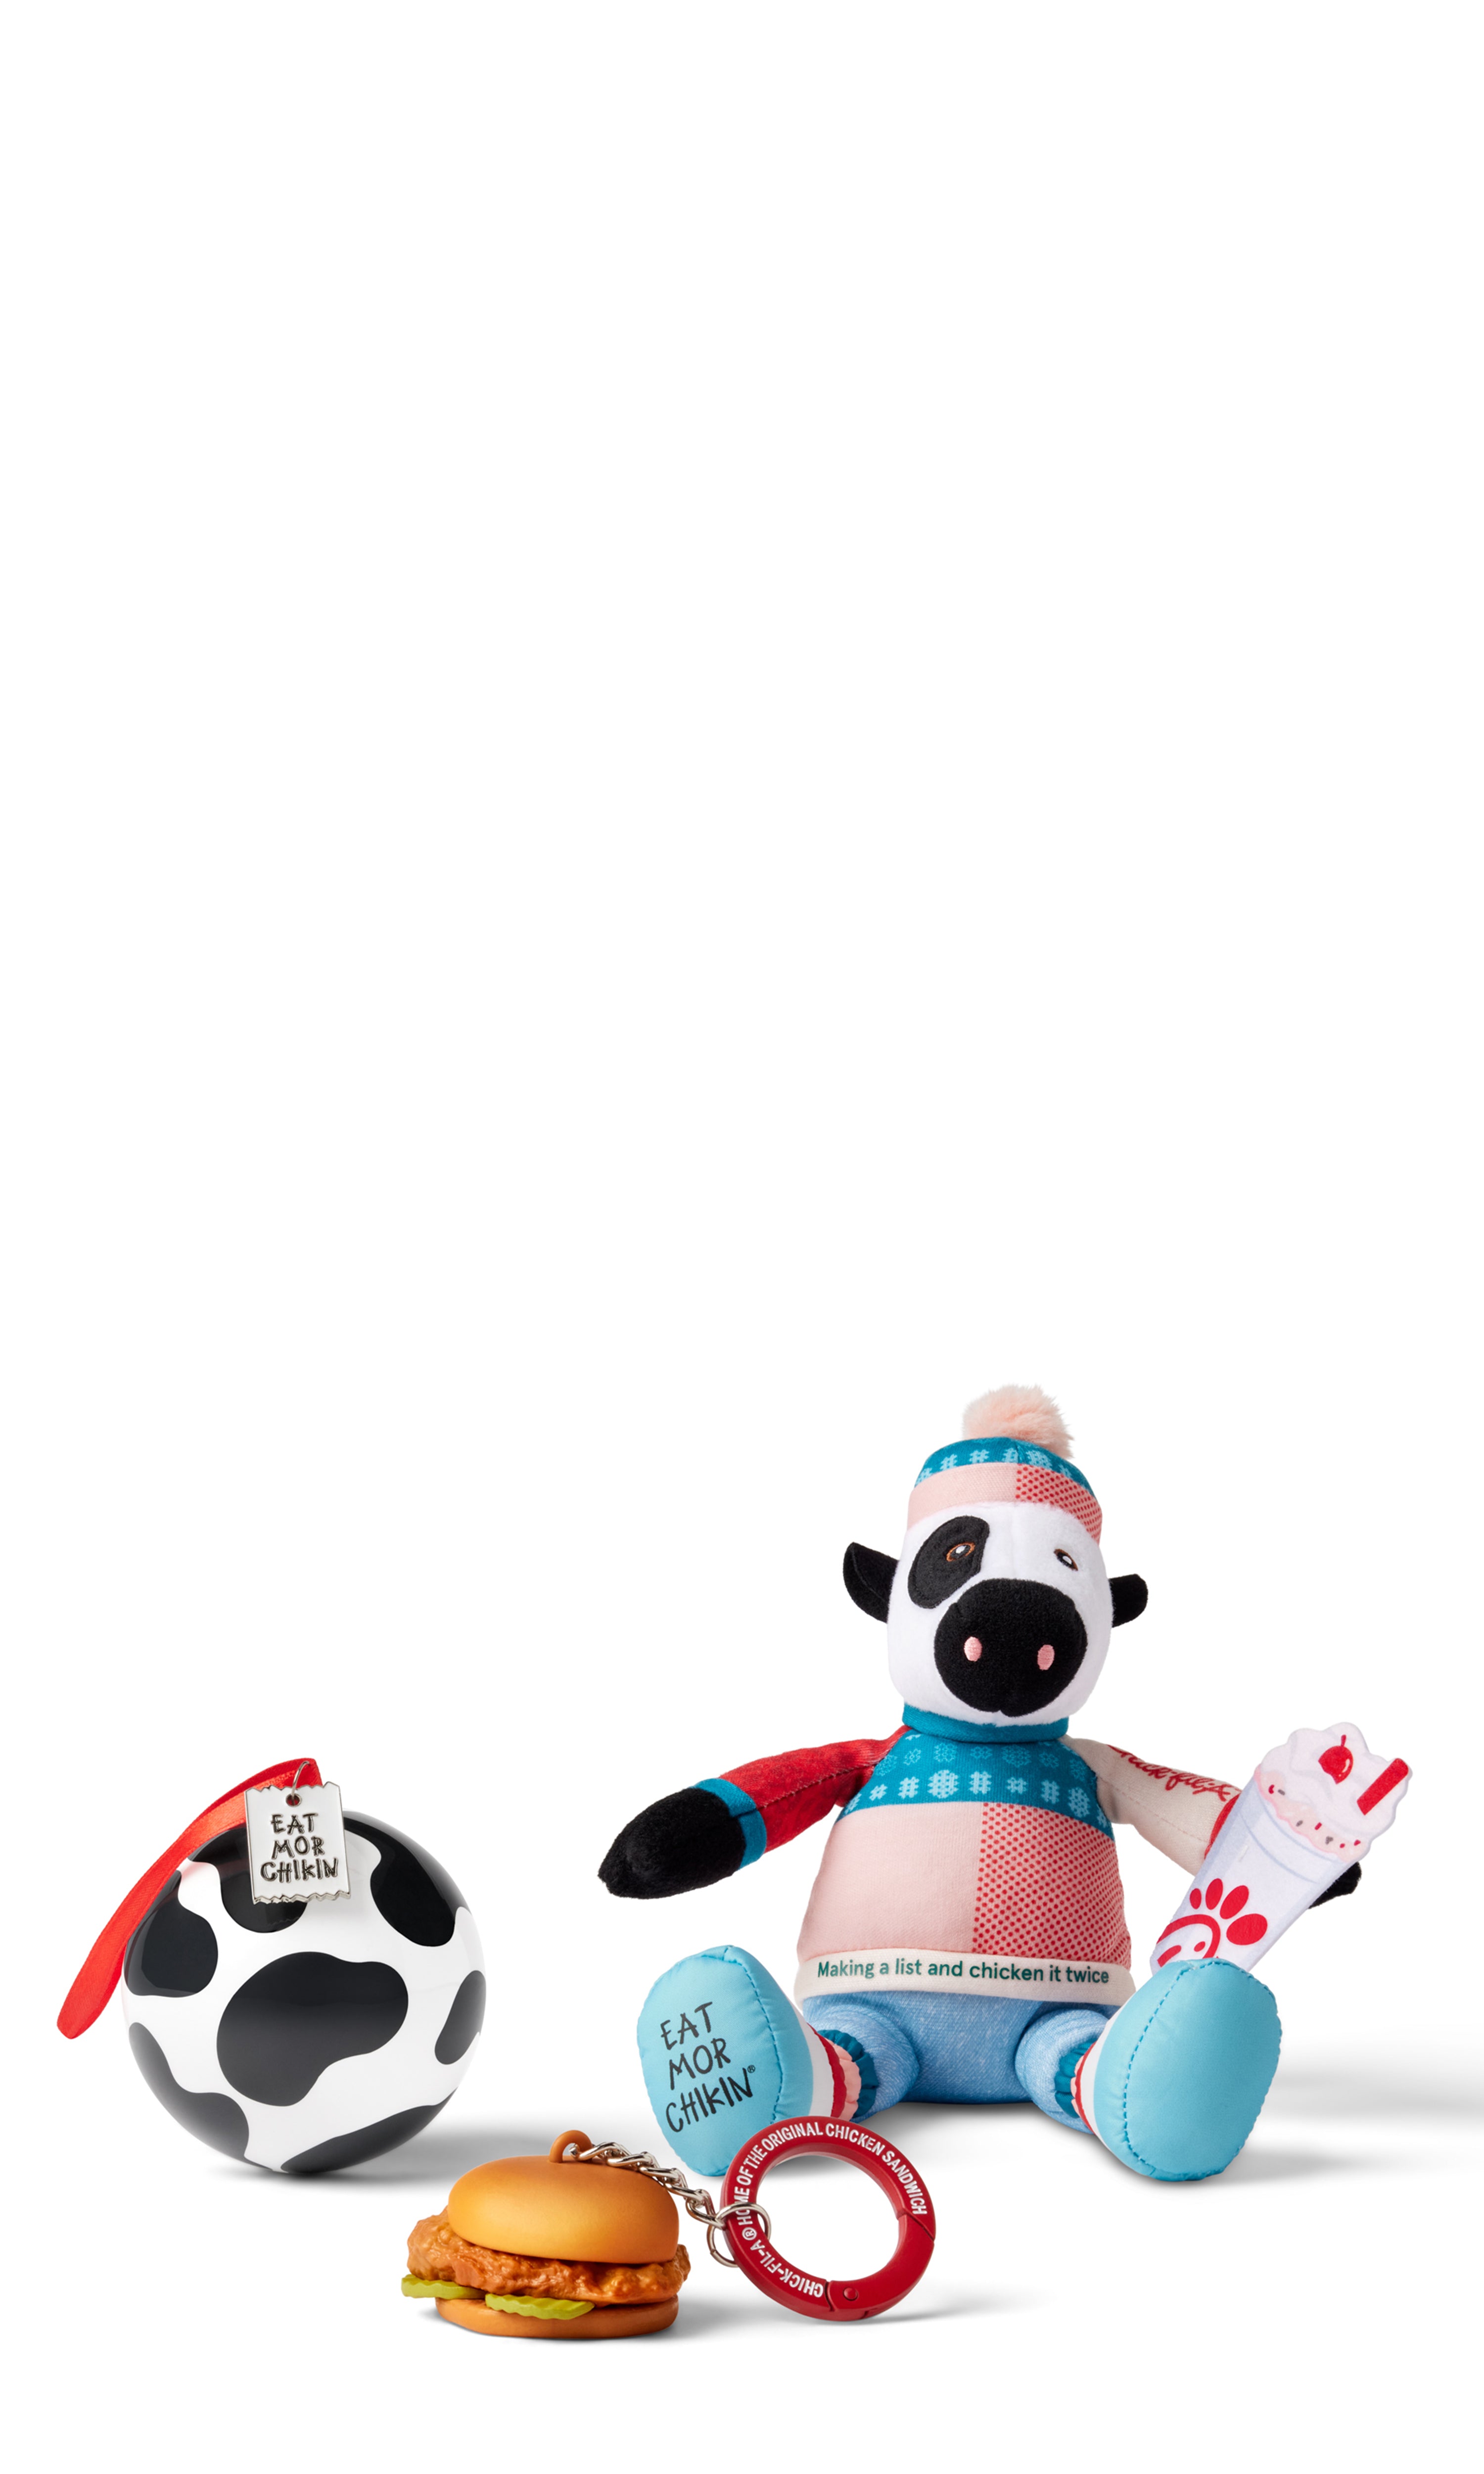 Original Chick-fil-A® Chicken Sandwich keychain, cow print ball ornament, and and cow plush in festive sweater and beanie